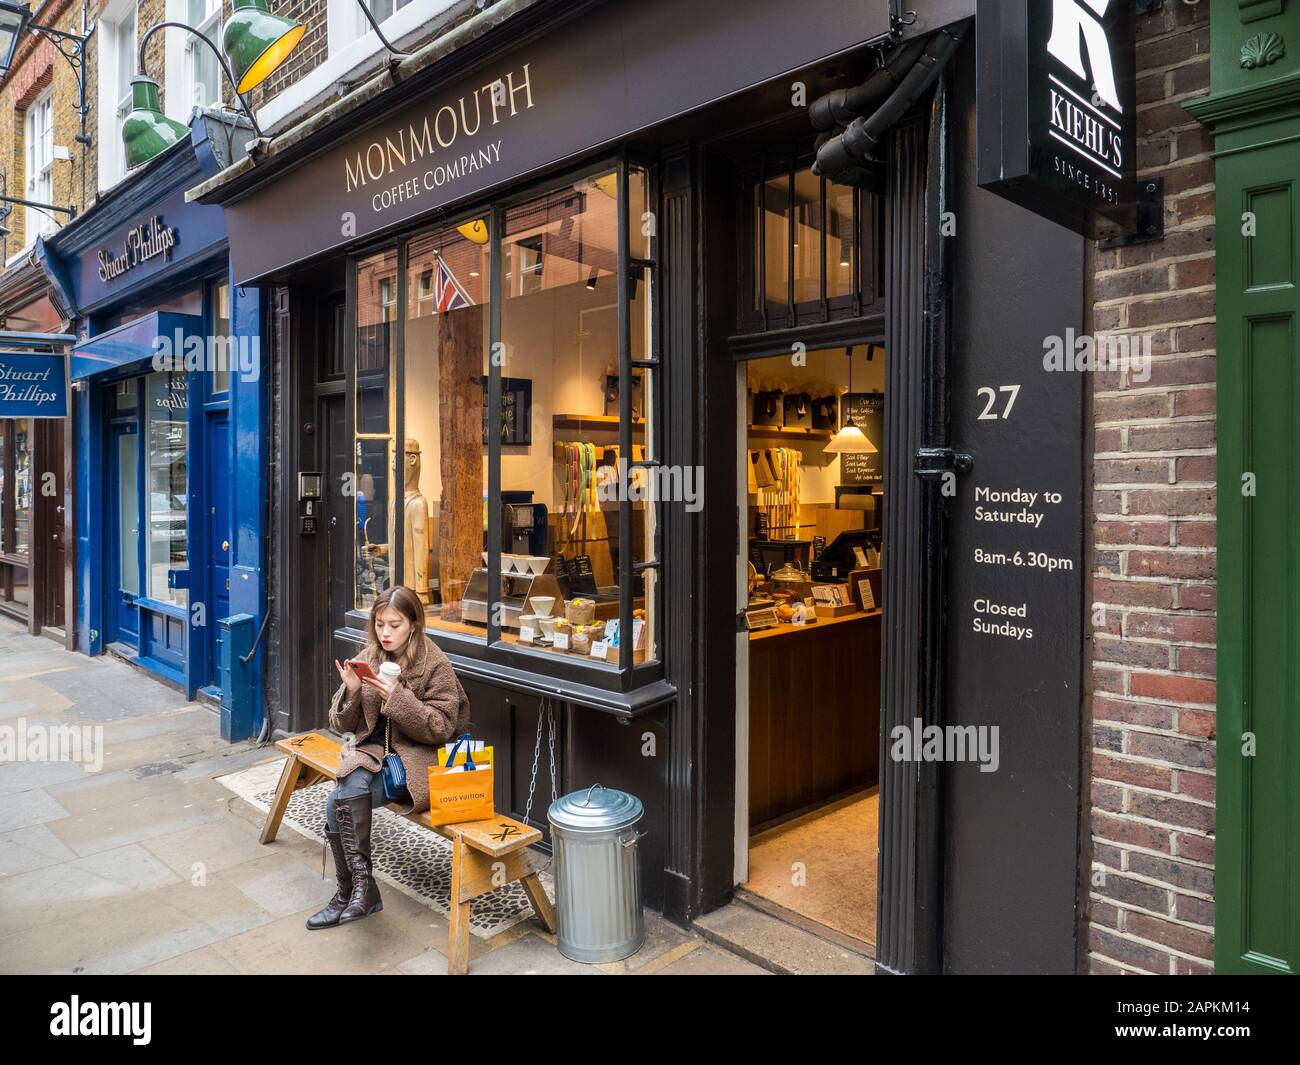 Woman Sitting outside, Monmouth Coffee Shop, Seven Dials, Covent Garden, London, England, UK, GB. Stock Photo